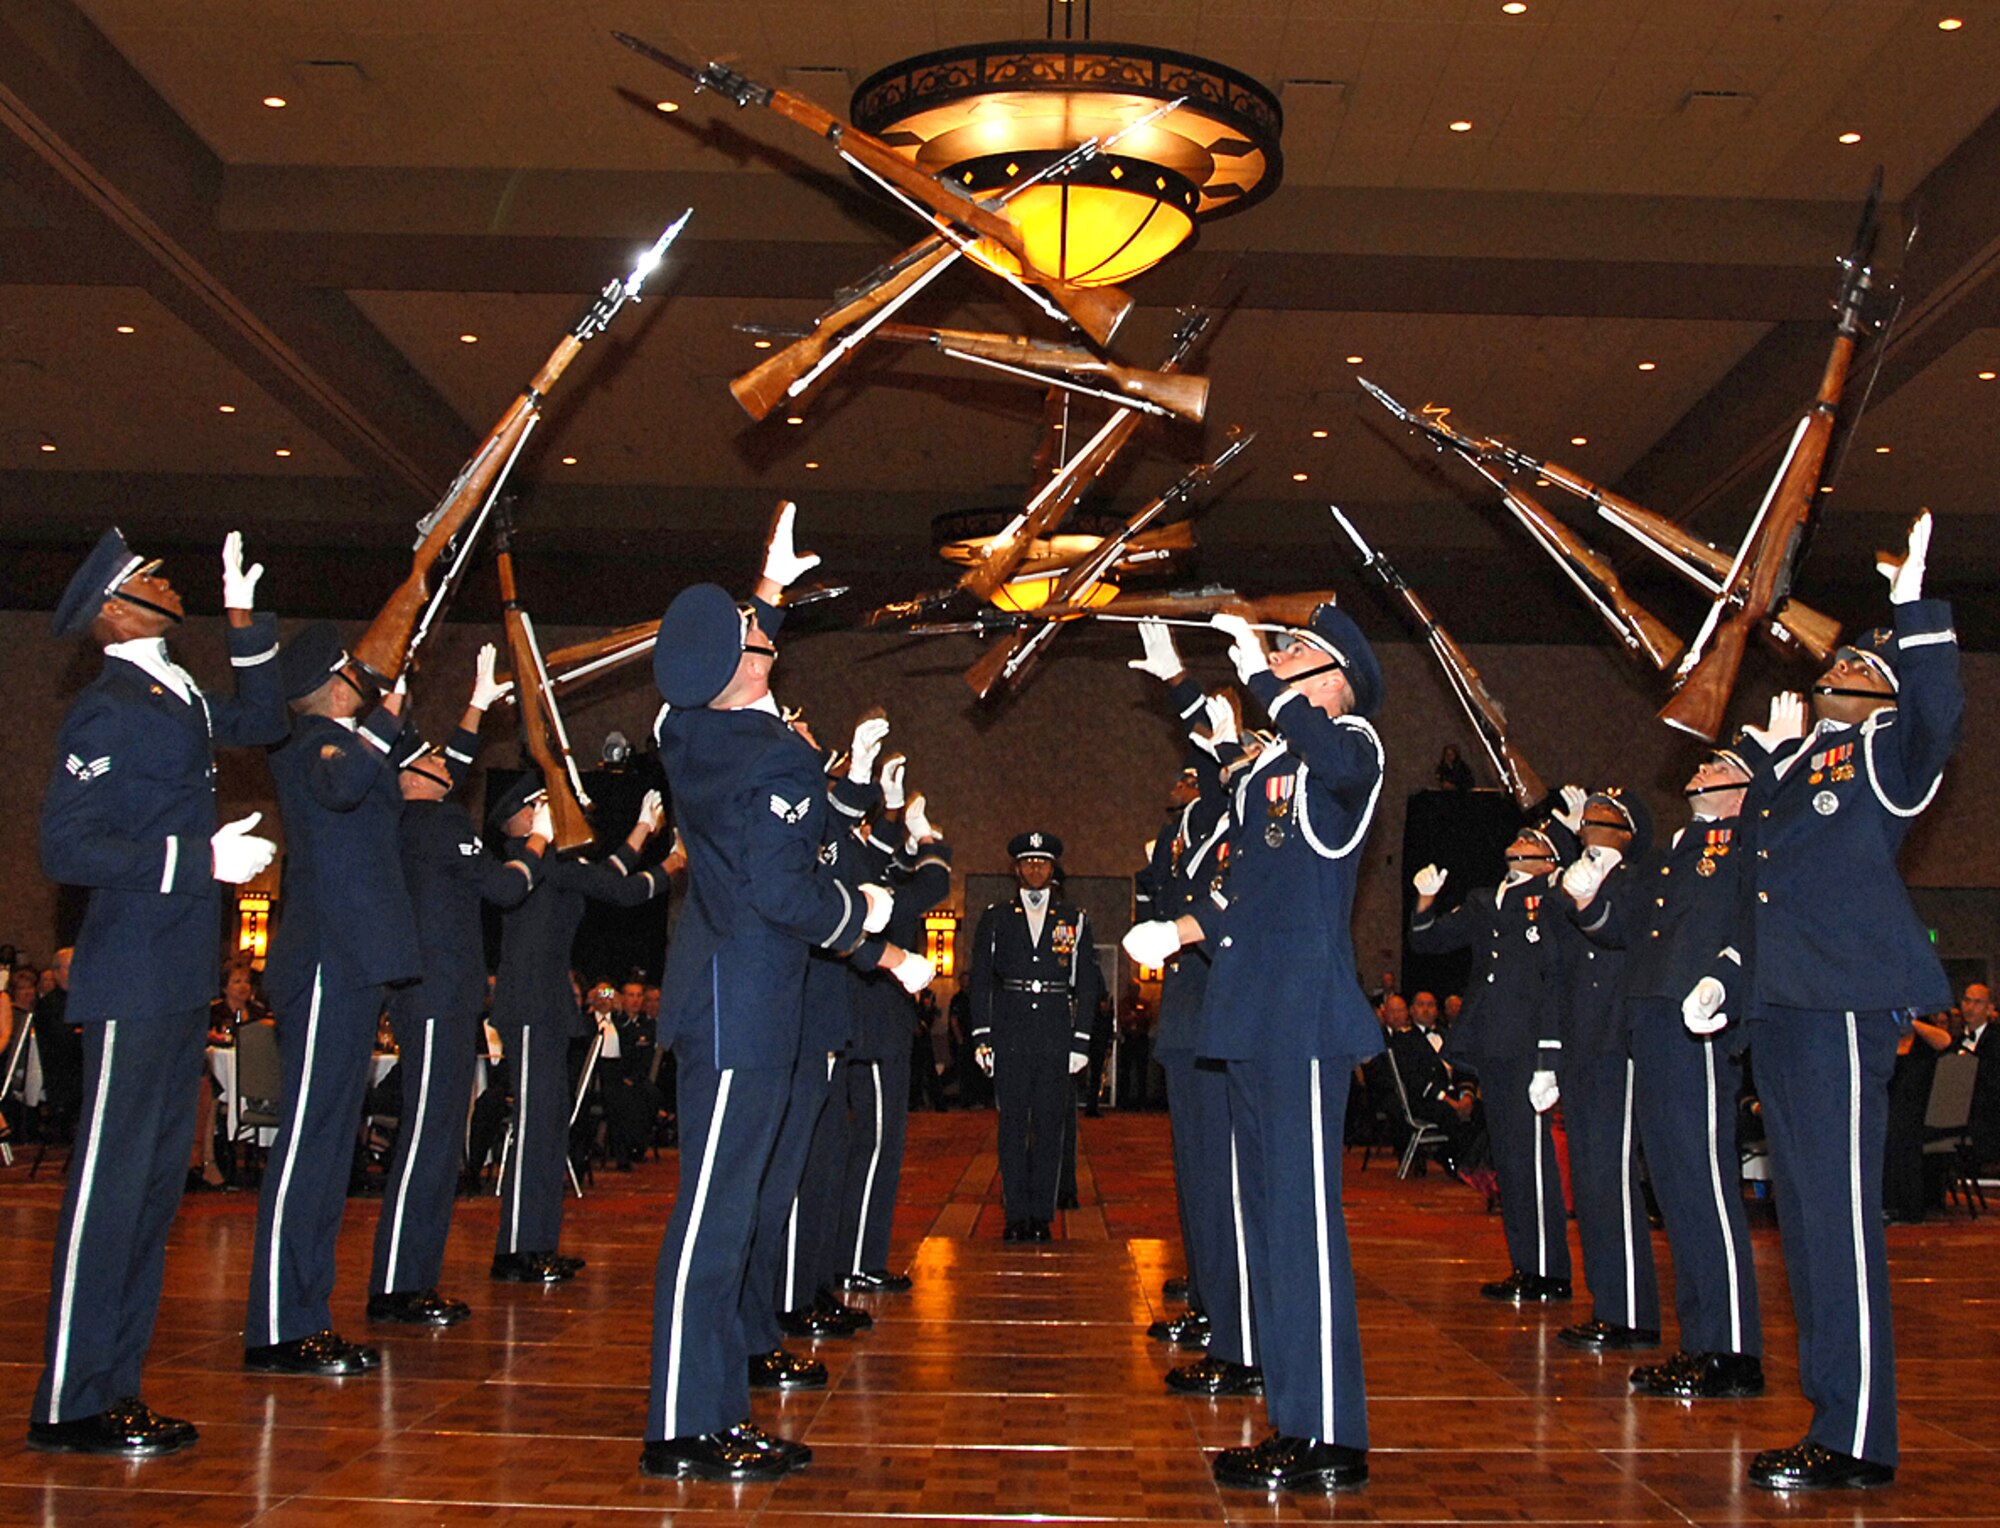 The U.S. Air Force Honor Guard Drill Team thrills the audience at the New Mexico Air Force Bases 60th Anniversary Celebration at Sandia Resort, Sept. 14. U.S. Air Force photo by Todd Berenger